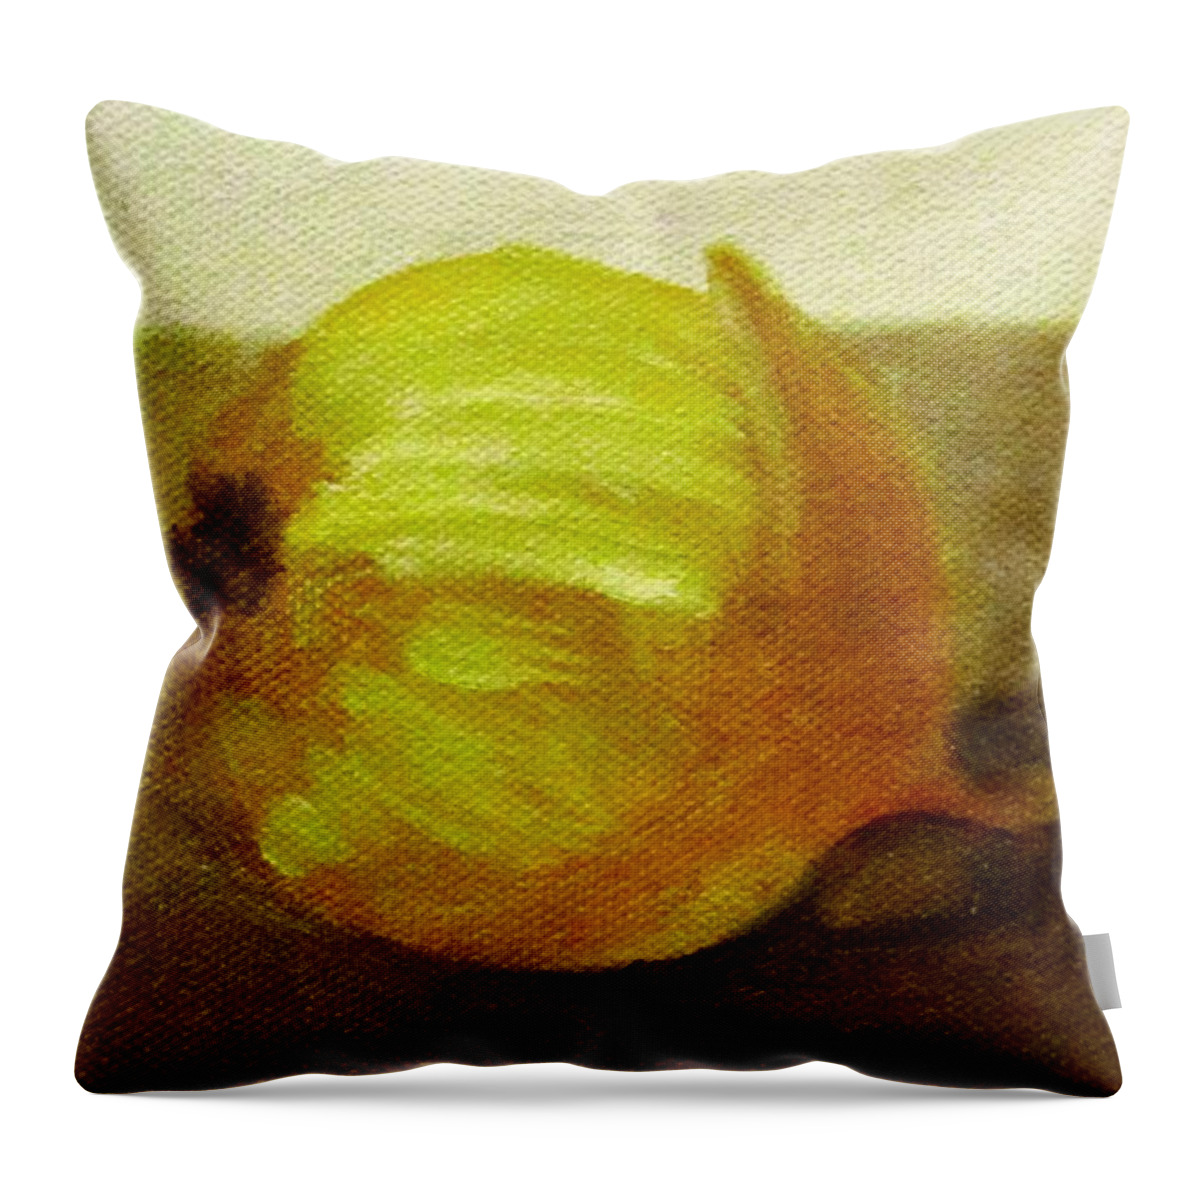 Onion Throw Pillow featuring the painting Onion by Patricia Cleasby